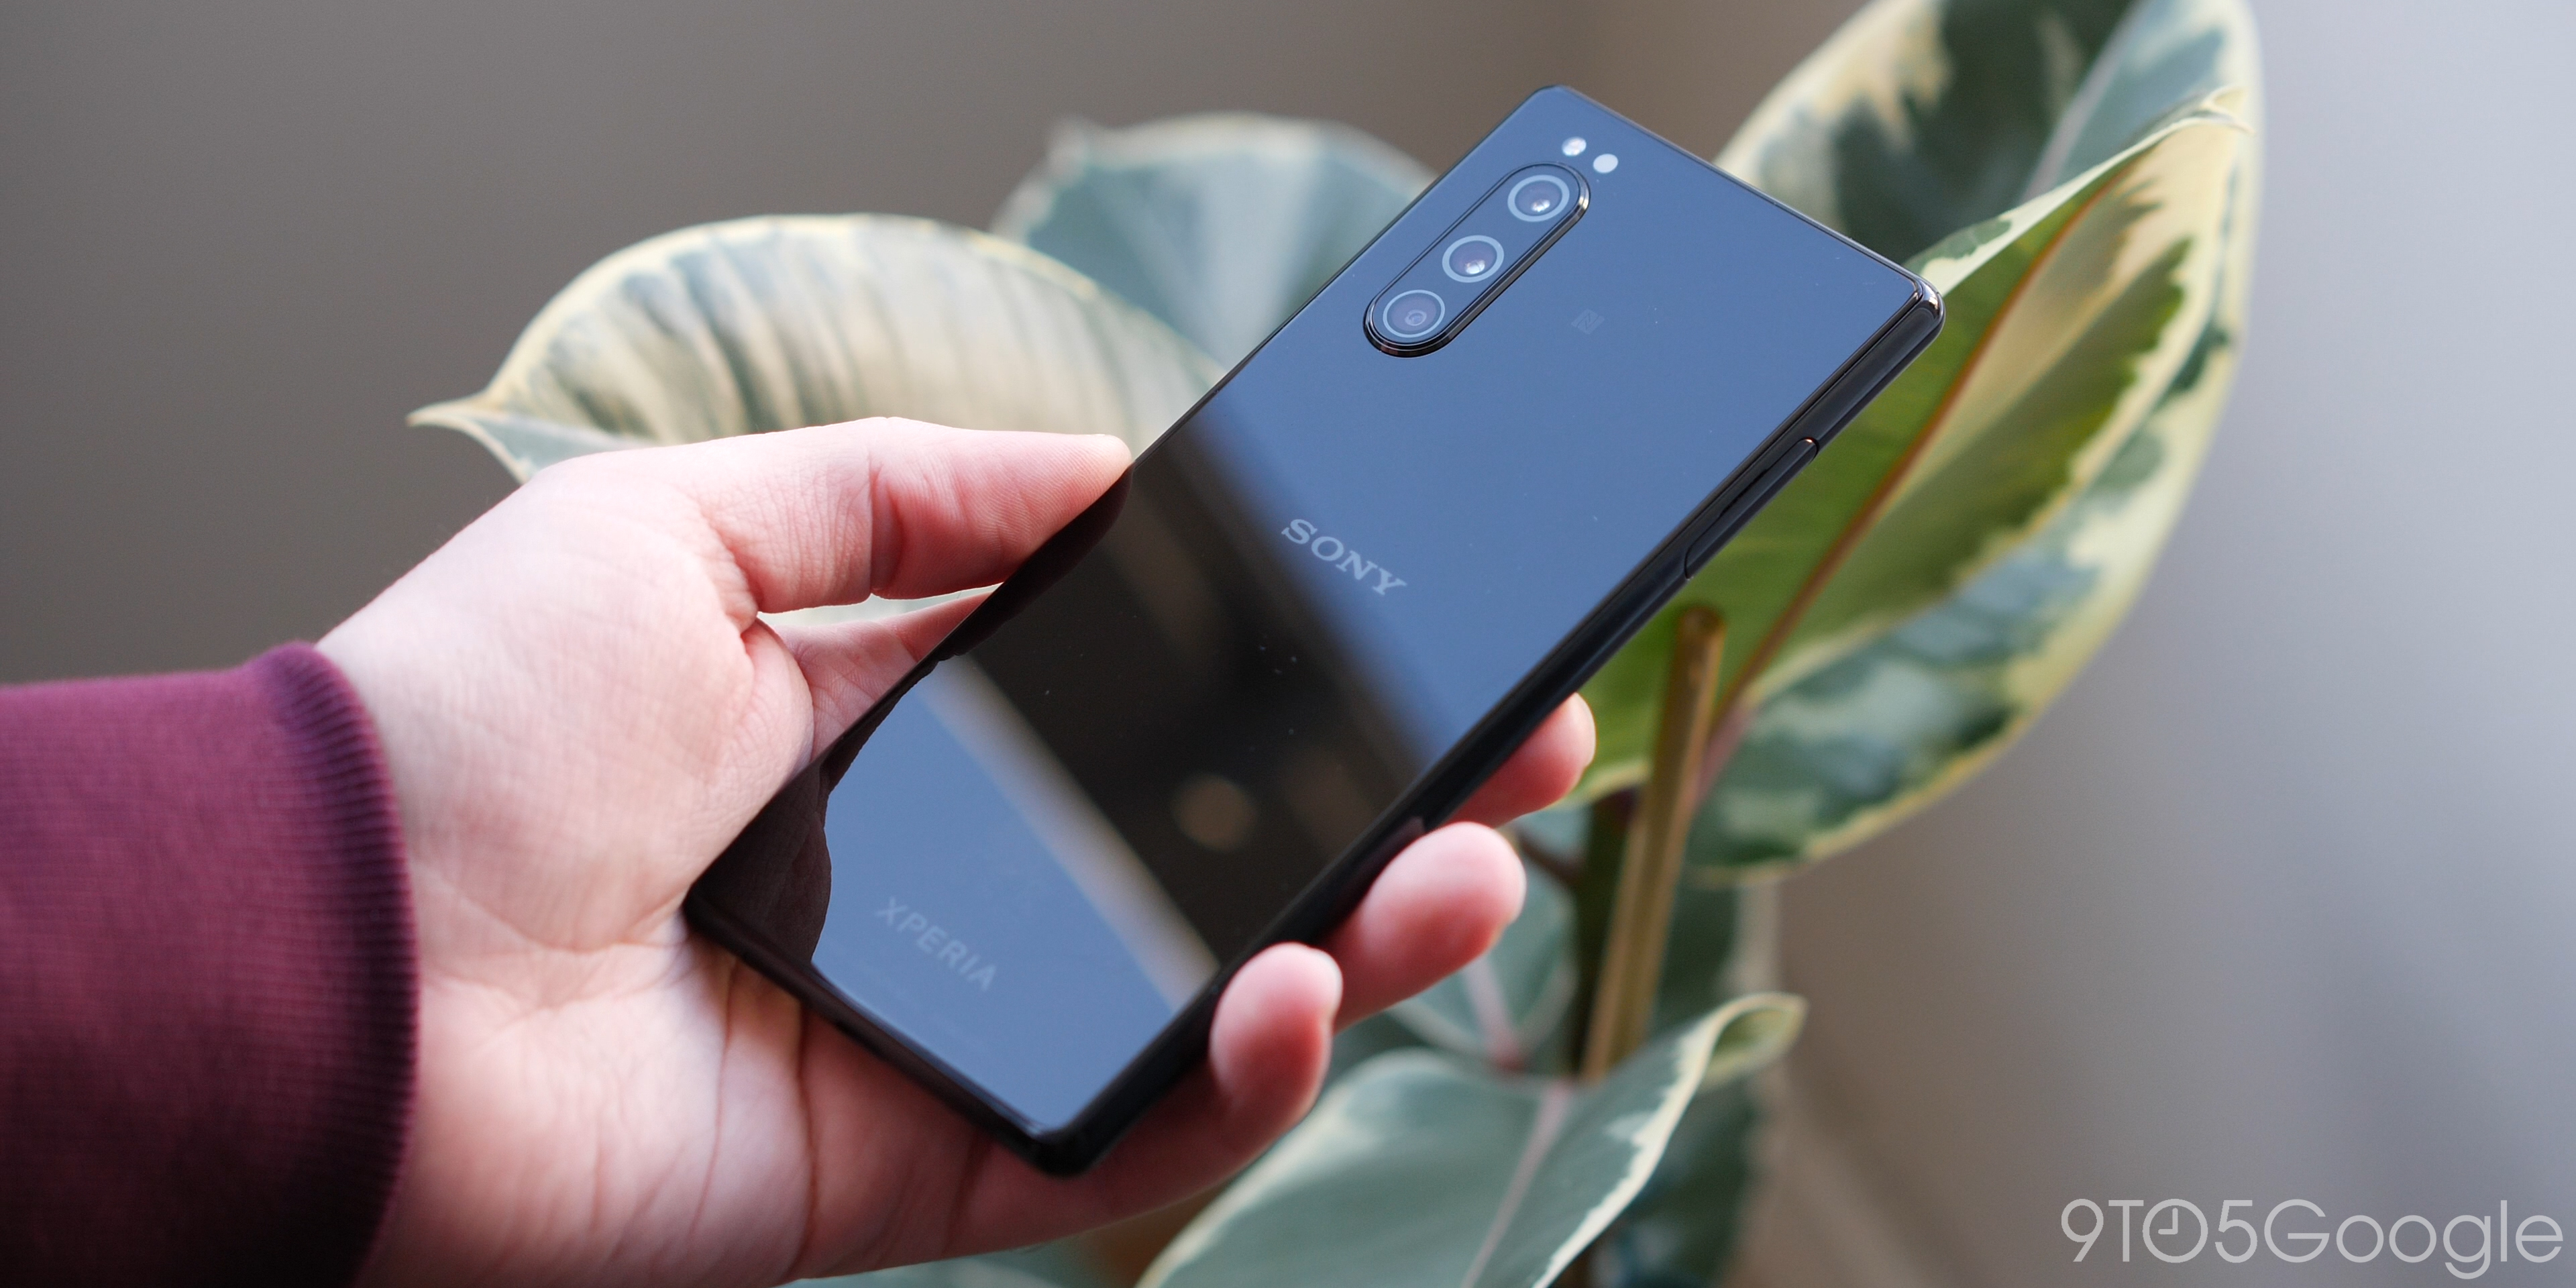 Mevrouw Gewoon Ook Sony Xperia 5: 'Smaller' but definitely not compact [Video] - 9to5Google